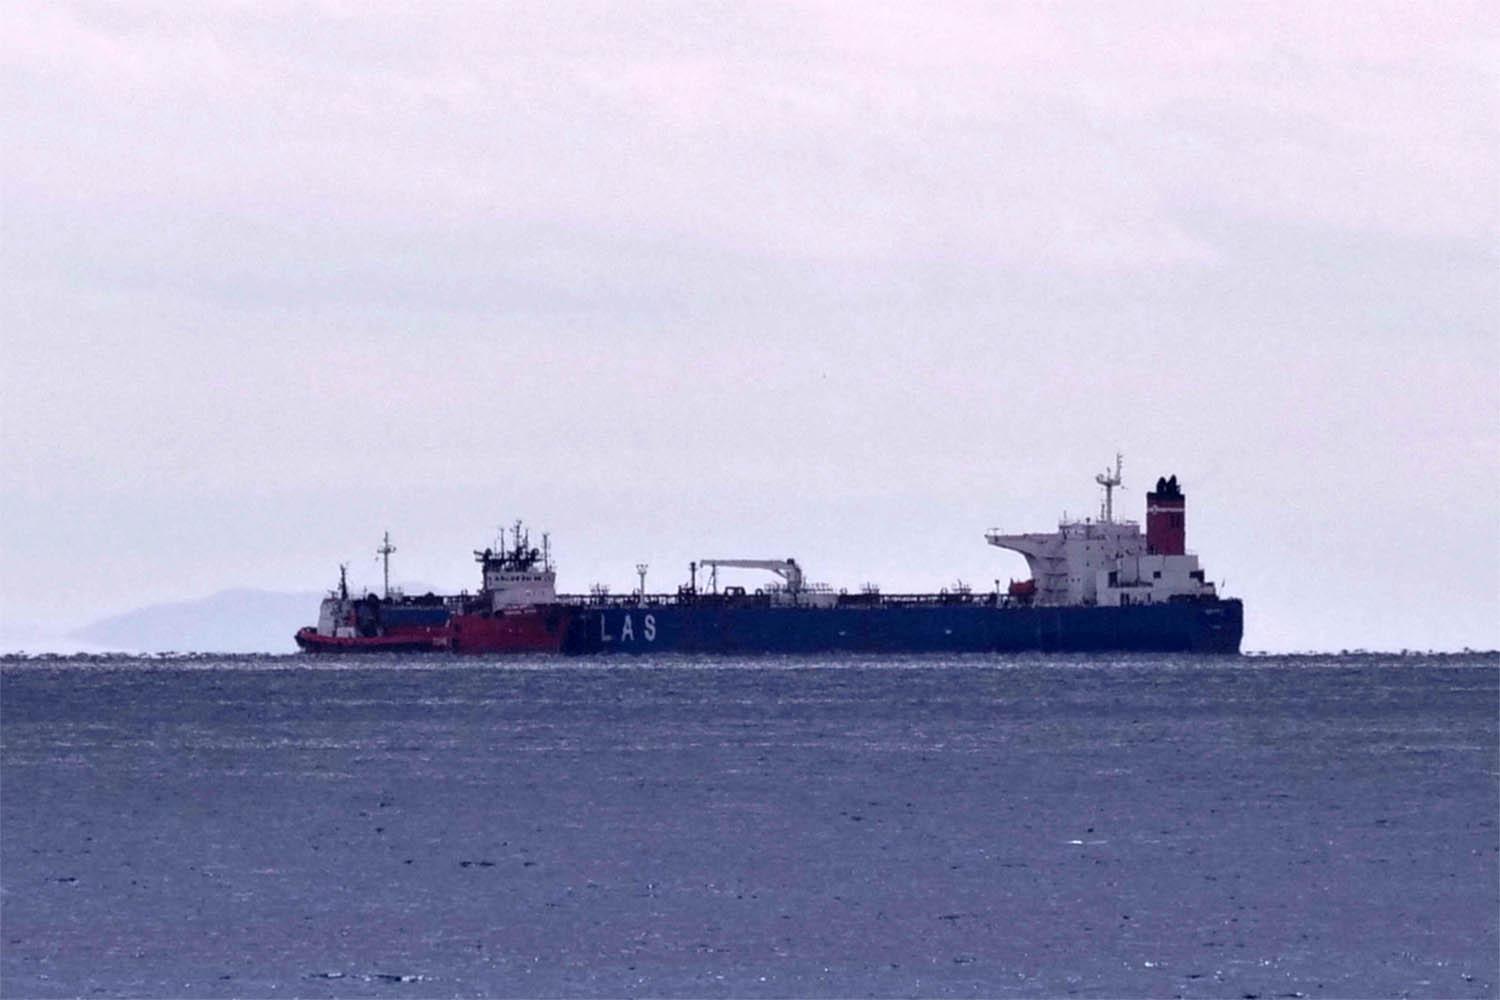 The seized oil tanker Lana is seen anchored off the shore of Karystos